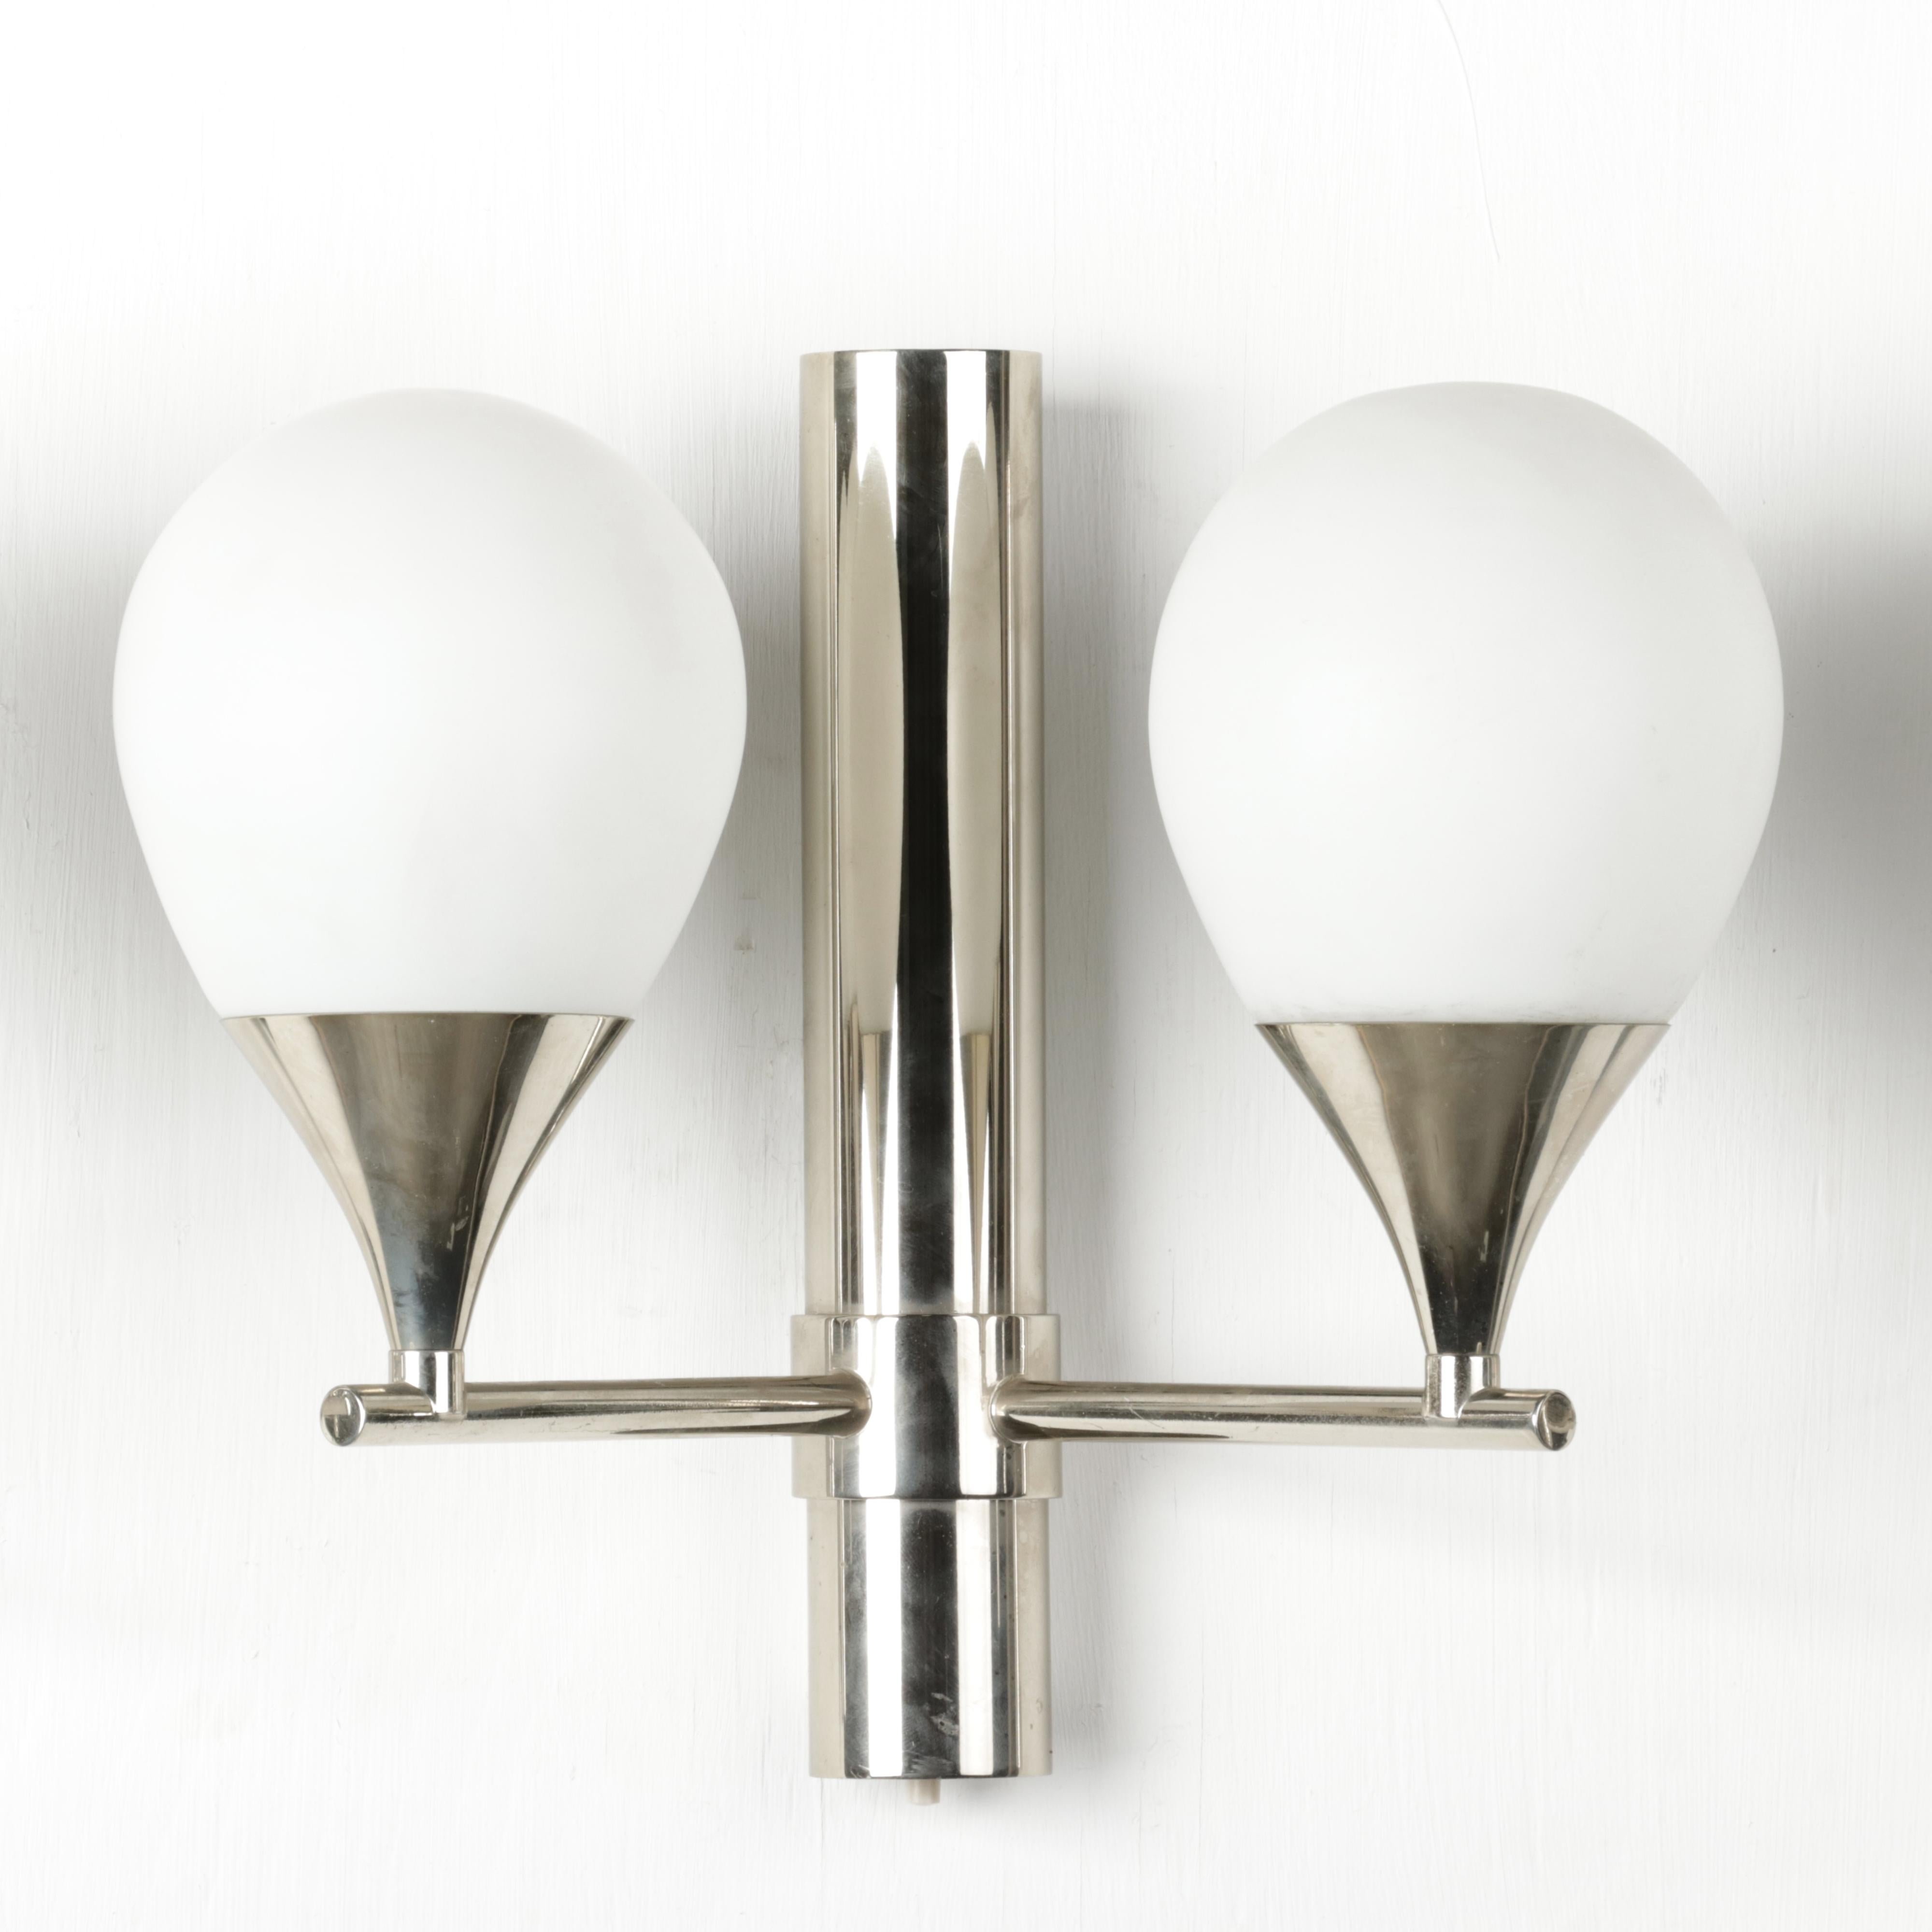 Set of Four Mid-Century Modern Chrome Plated Sconces / Wall Lights In Good Condition For Sale In Casteren, Noord-Brabant